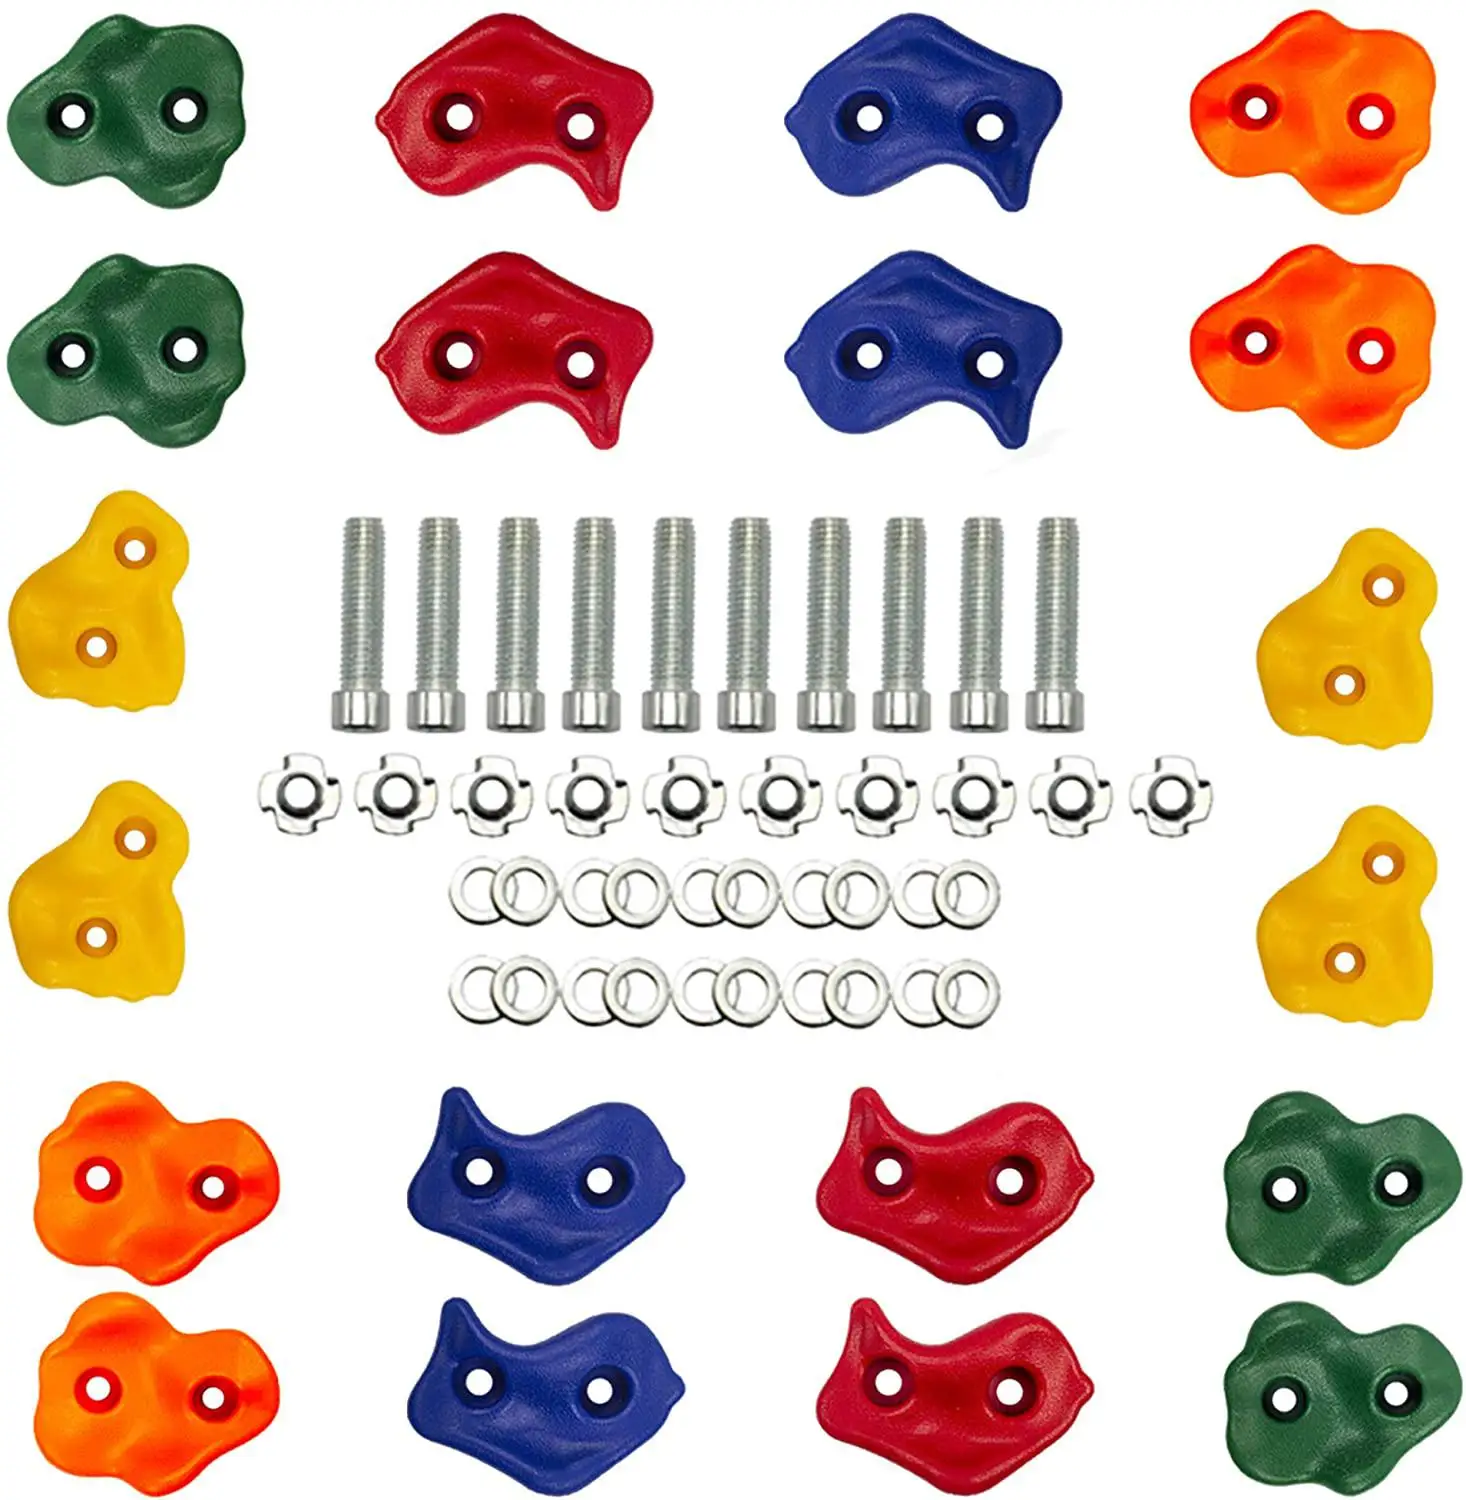 Indoor and outdoor Playground Climbing Wall WADEO 20 Rock Climbing Holds For Kids Children With Installation Hardware Multi-Coloured Climbing Stones Set Bolts&T-nuts For Your DIY Rock Stone Wall 